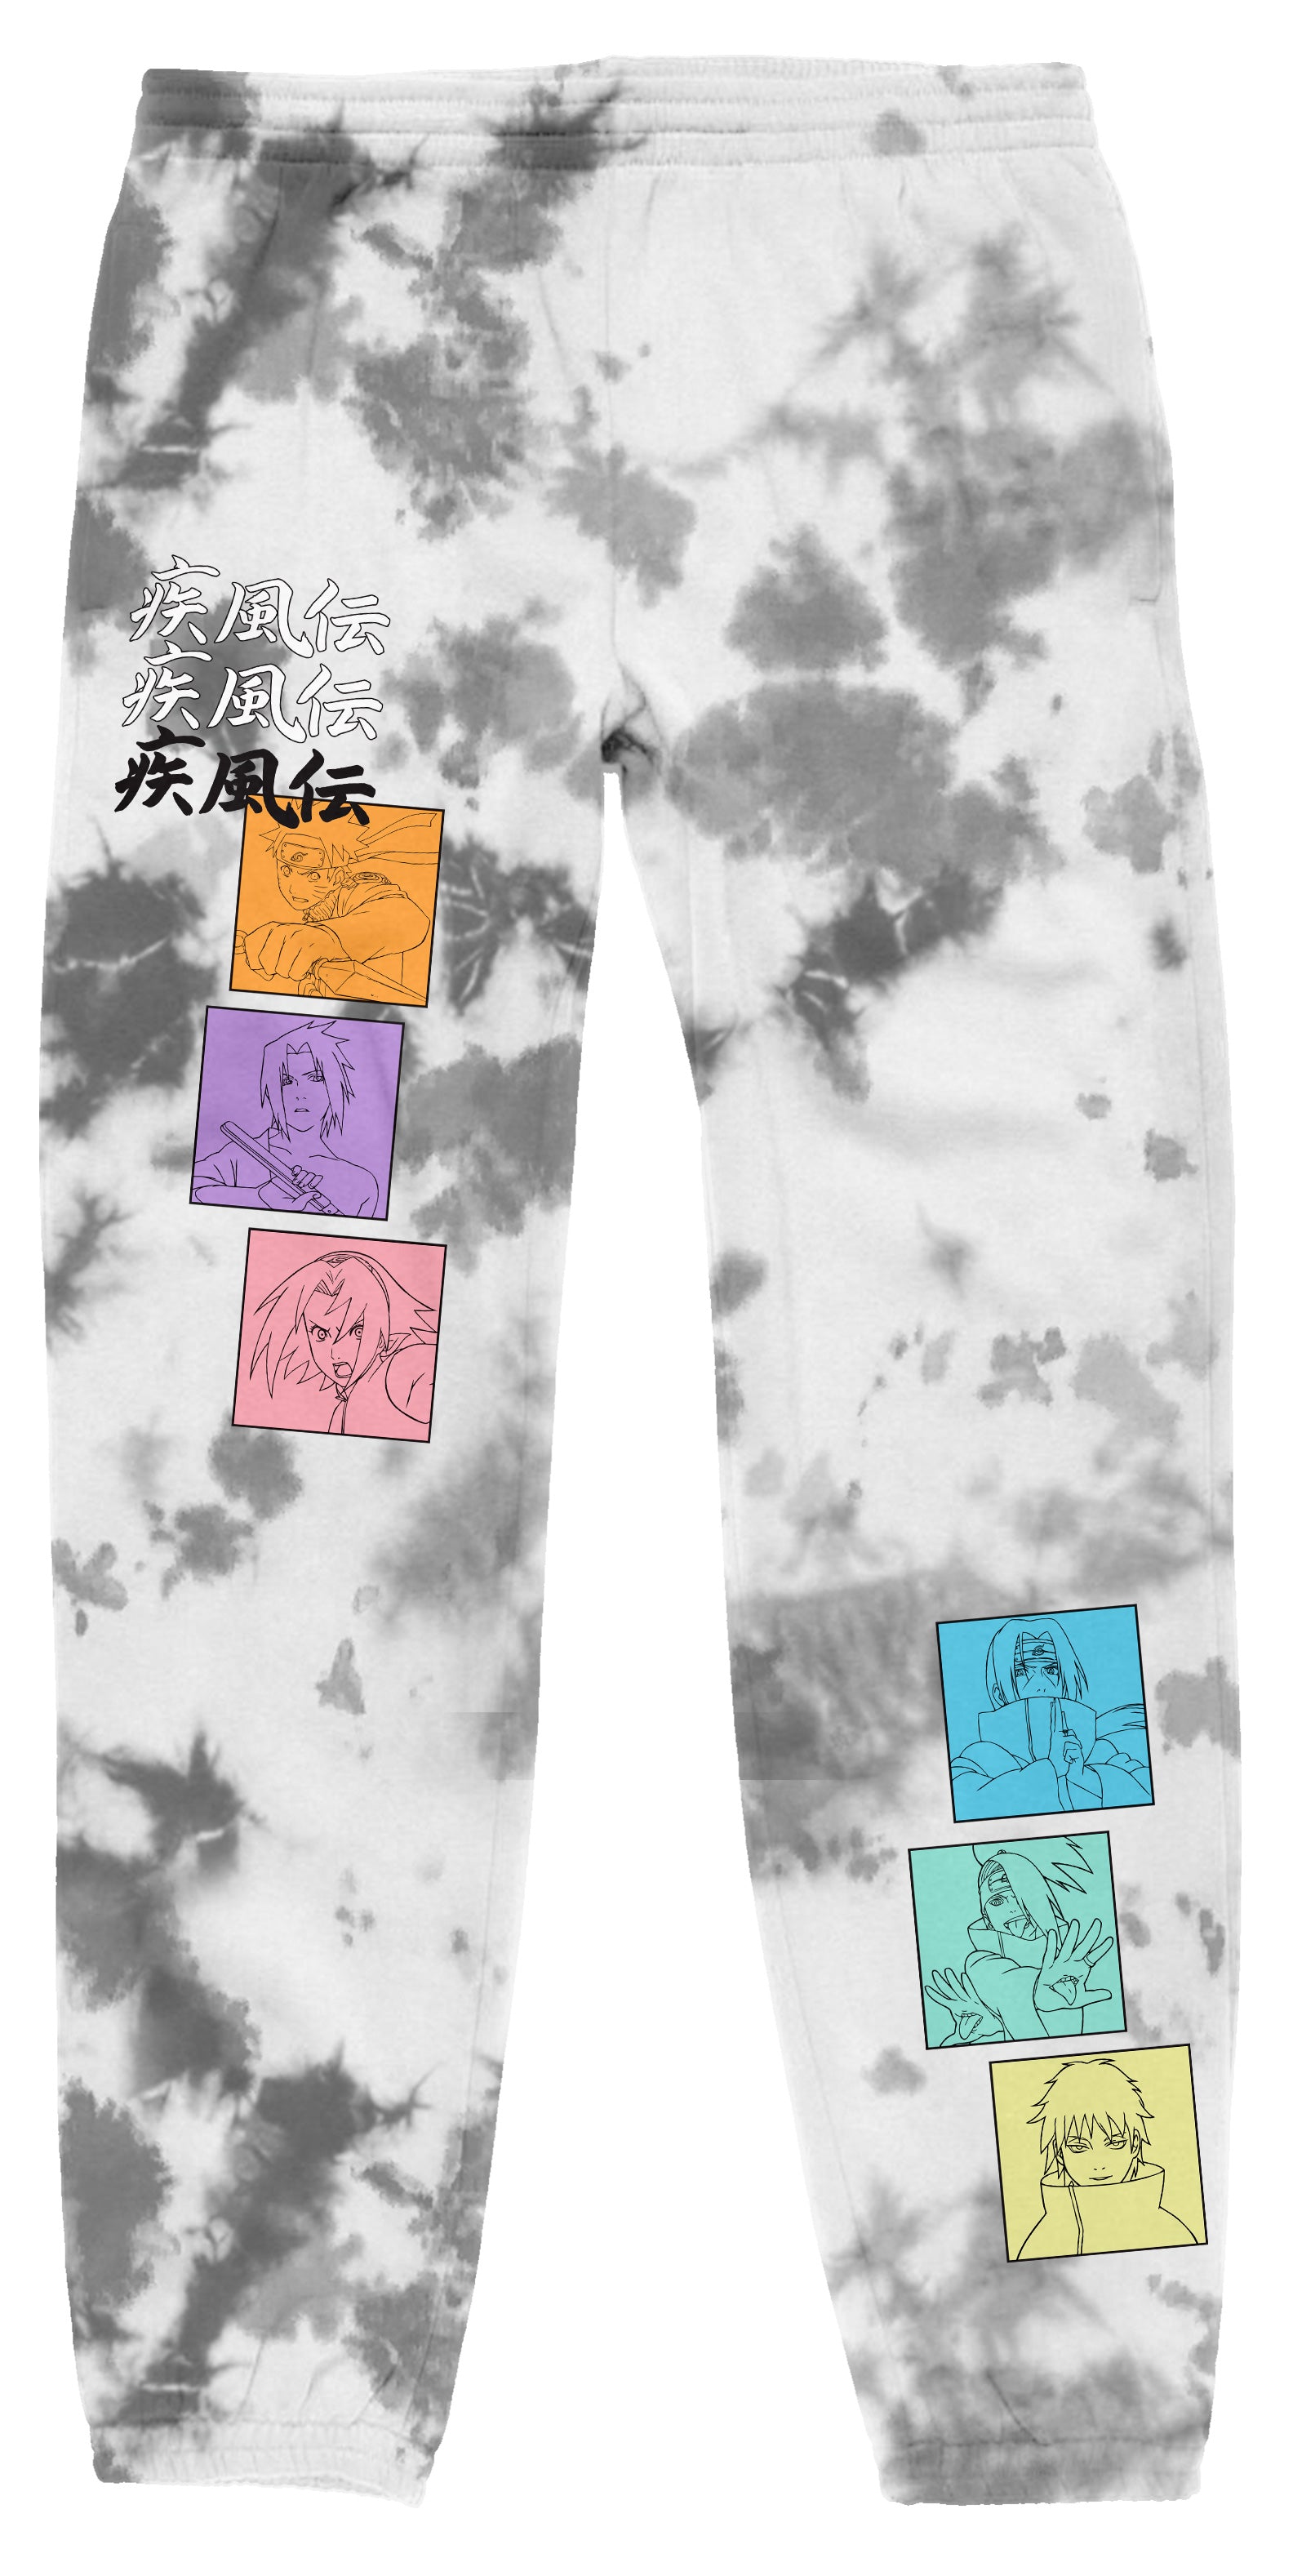 Naruto Shippuden - Cast Squares Dye Sweatpants - Crunchyroll Exclusive! image count 0